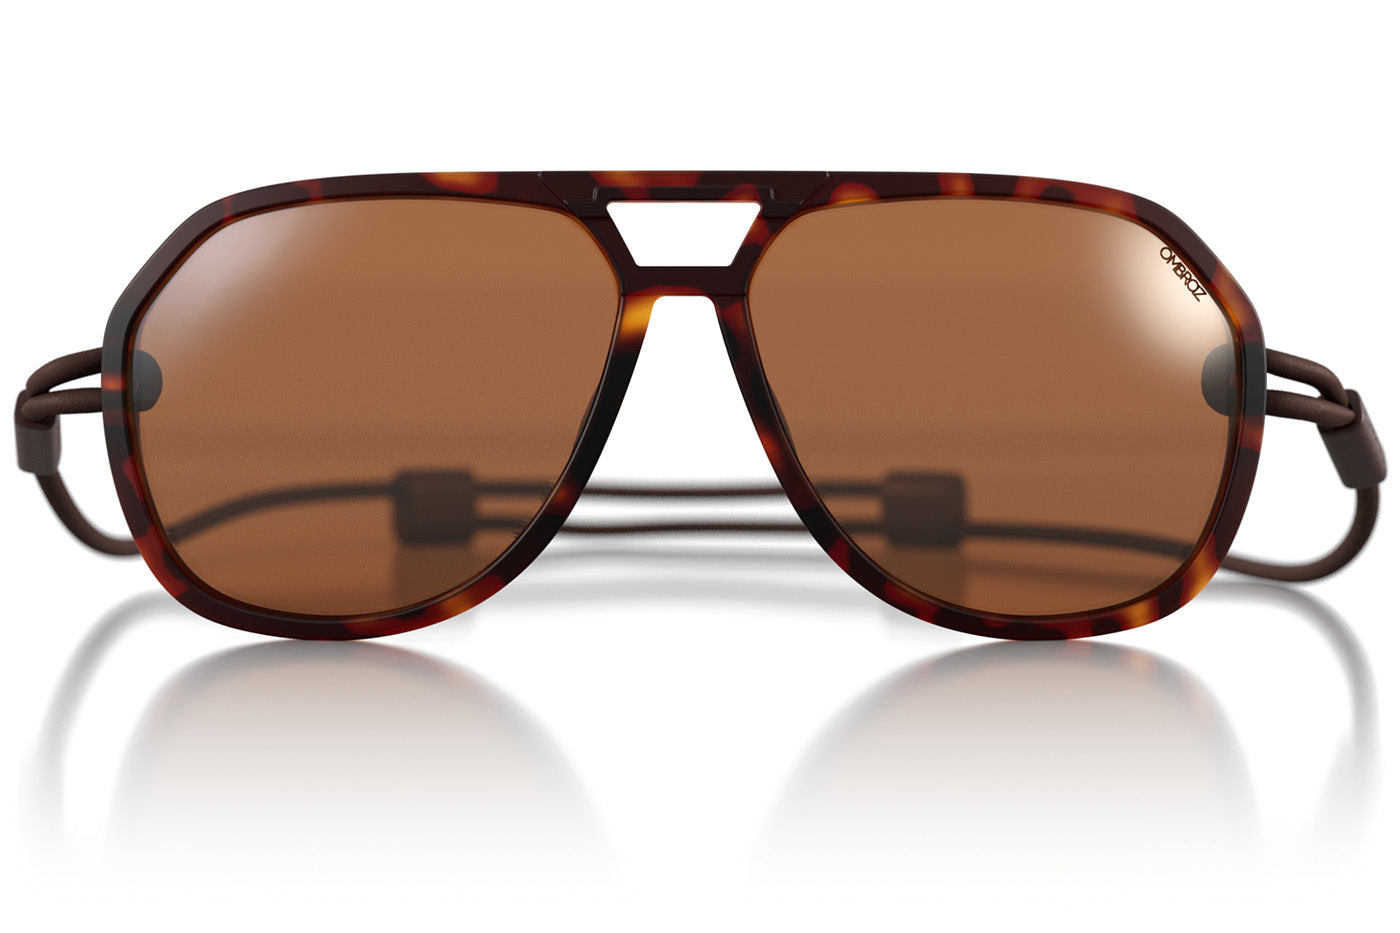 Tortoise_brown Ombraz unisex tortoise brown classic armless sunglasses with strap